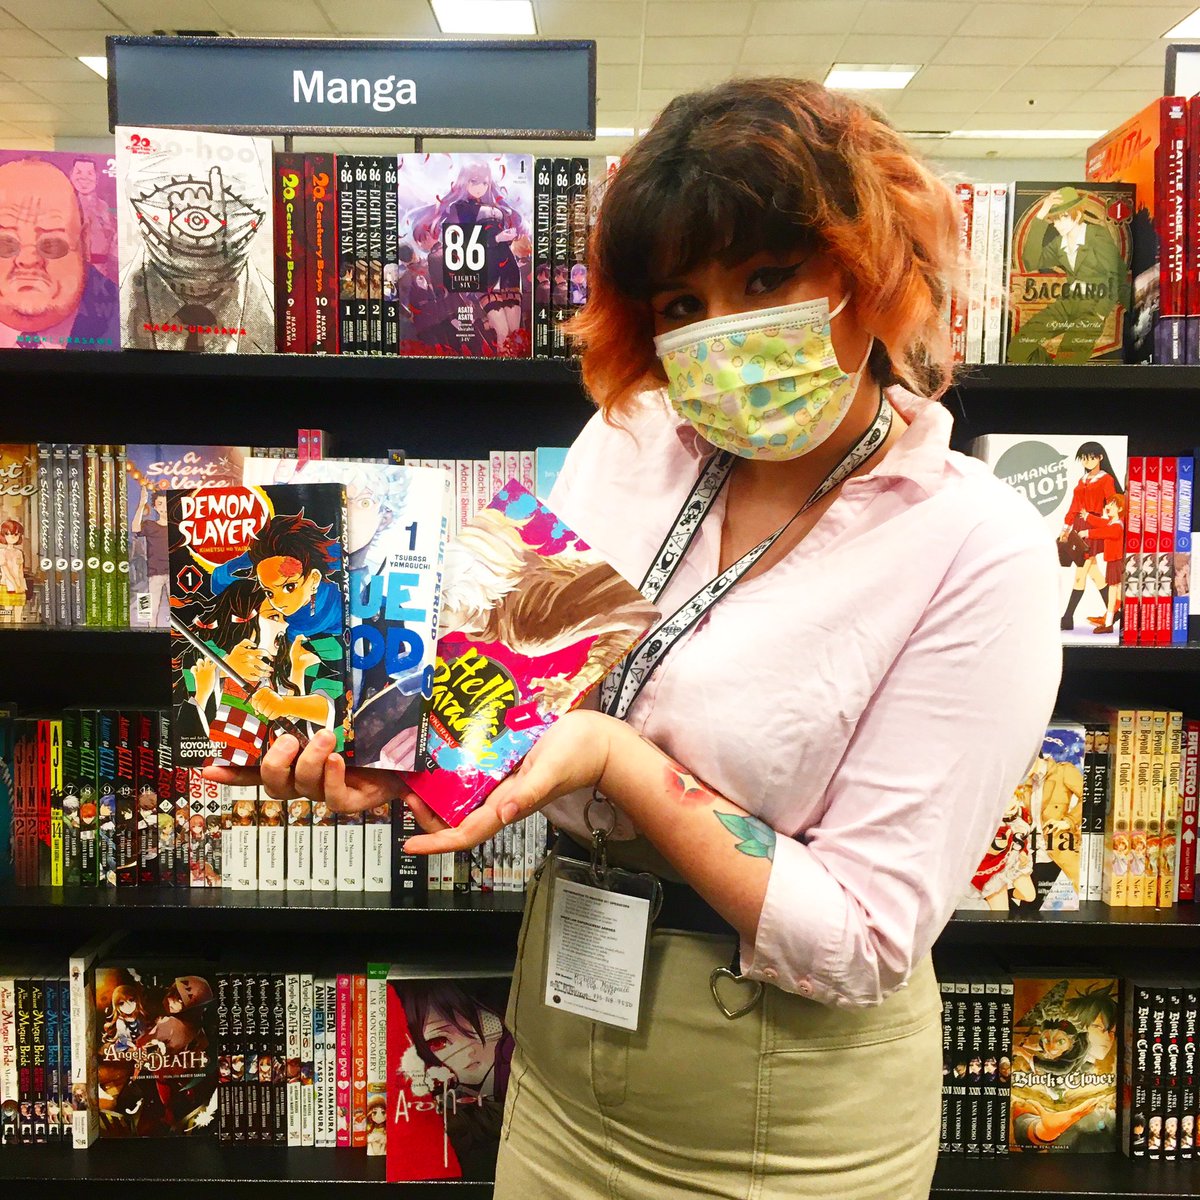 Barnes Noble Bookseller Anna Is A Huge Manga Fan And She Recommends Demon Slayer Blue Period And Hell S Paradise Barnesandnoble 142bn Giftsforreaders Whattoreadnext Manga Mangarecommendation Mangareaders Hellsparadise